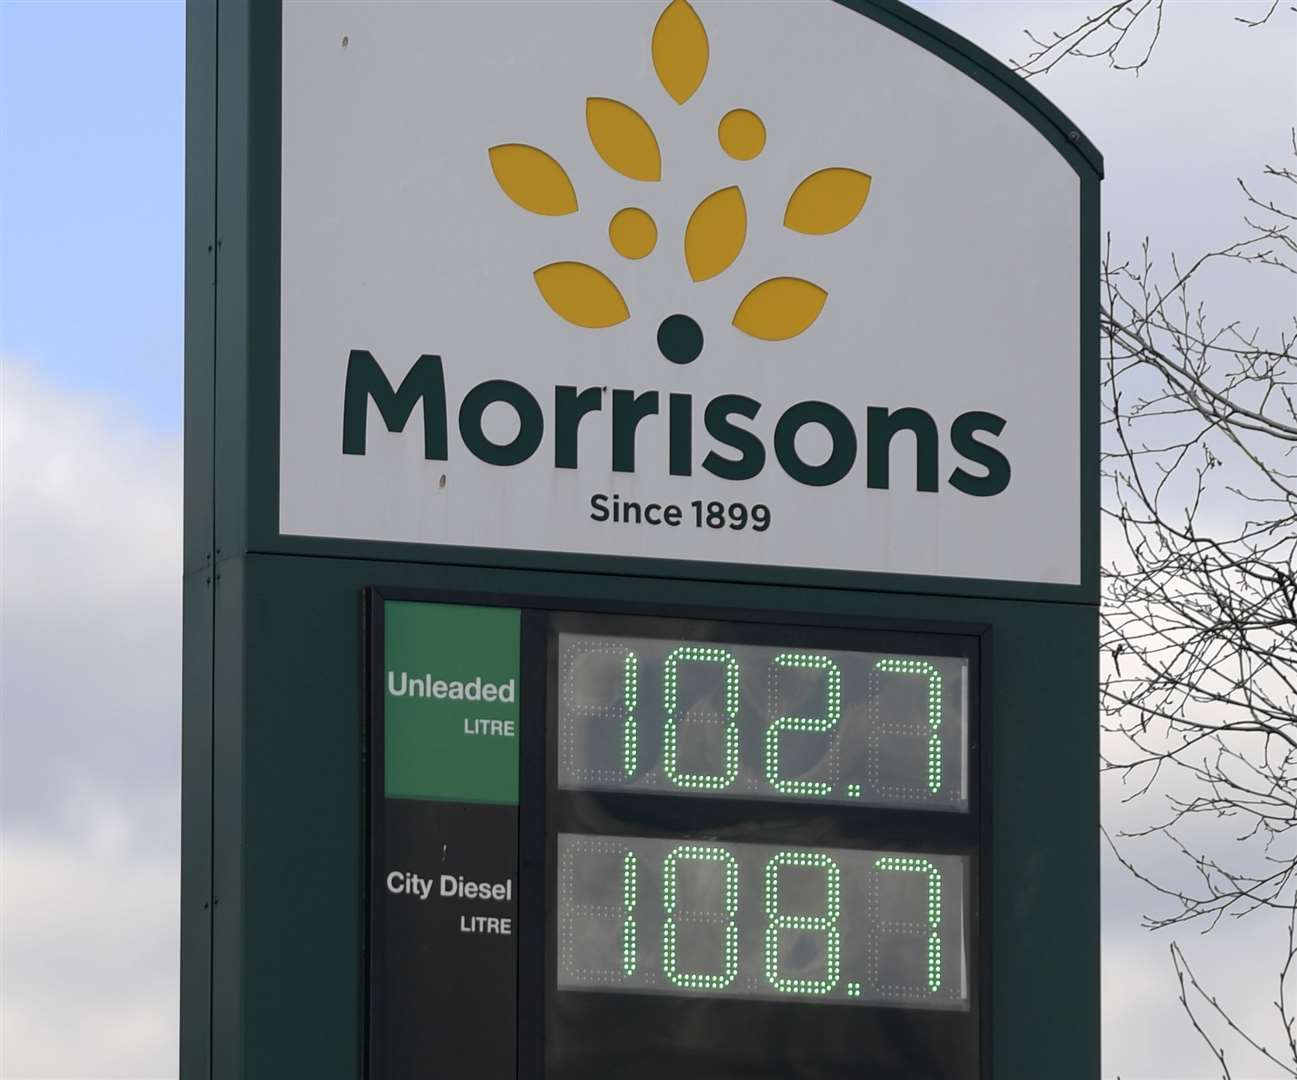 The petrol price at Morrisons in Gravesend was just £1.02 per litre last Thursday. All pictures: Barry Goodwin